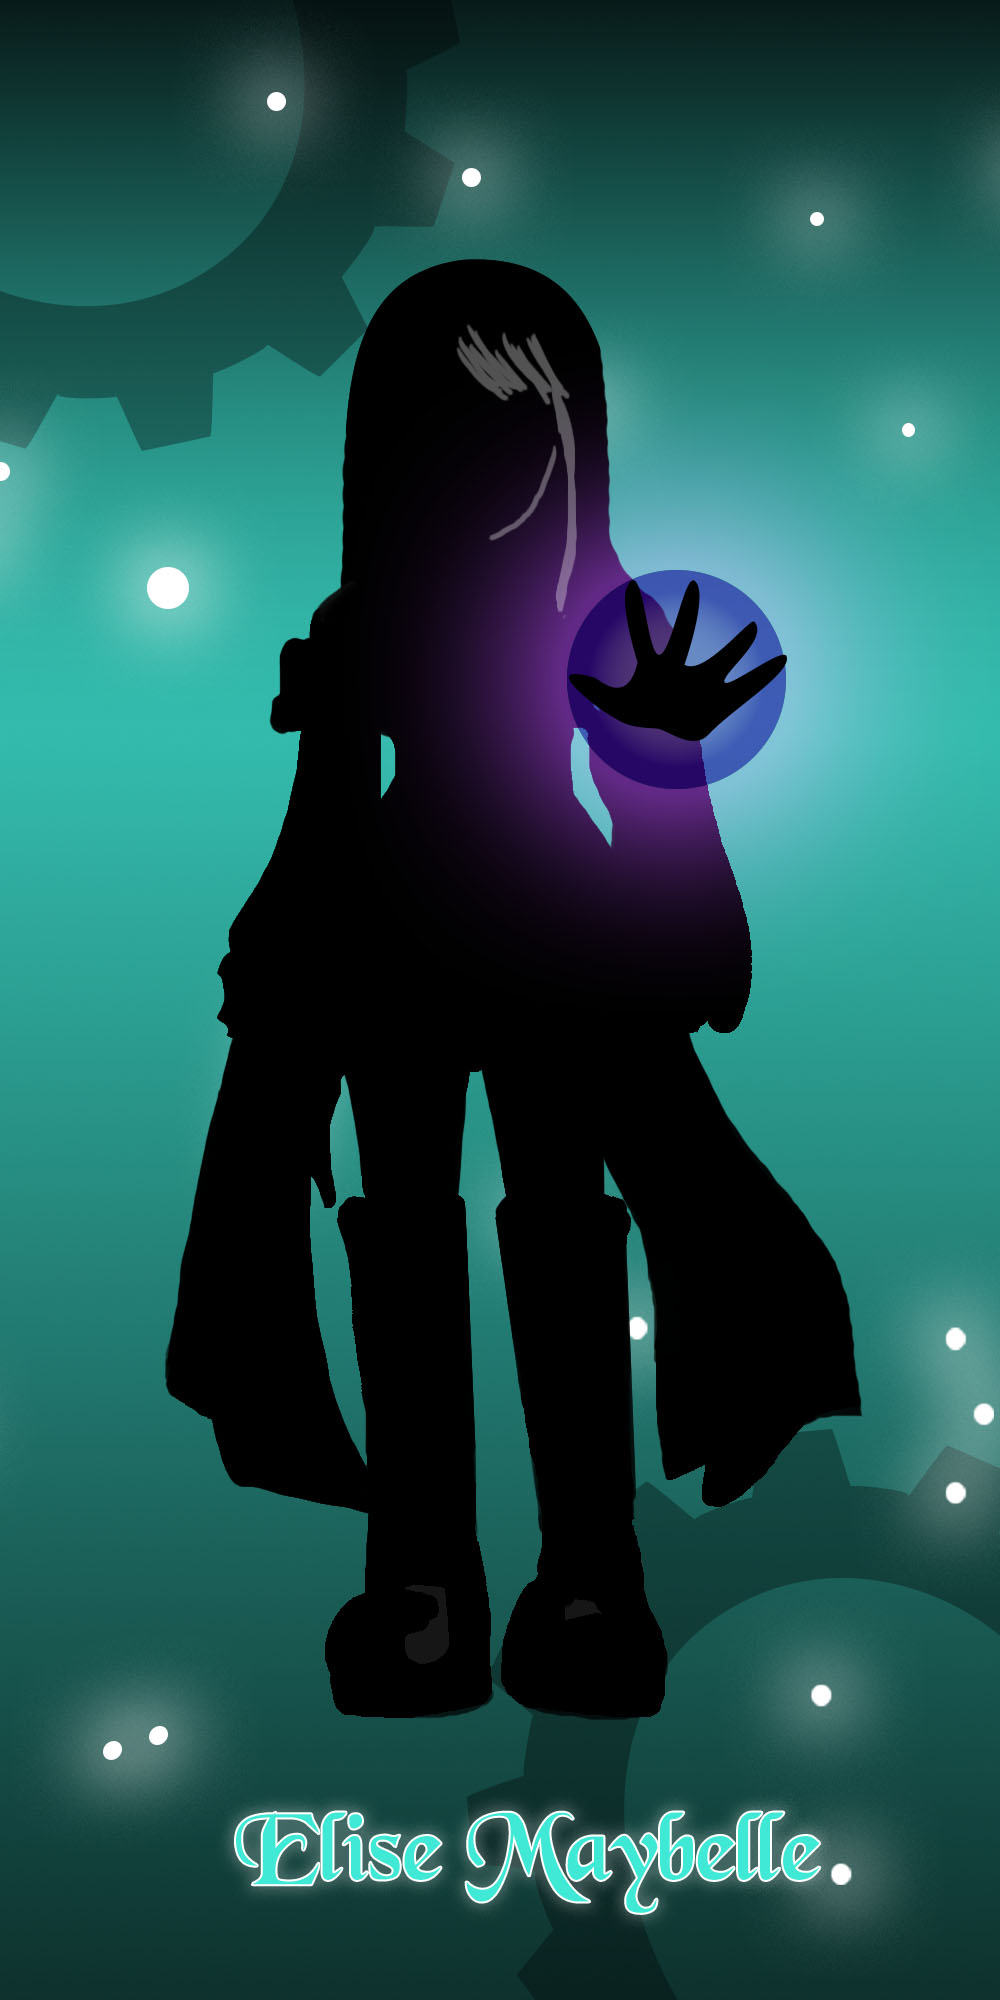 A silhouette image of Elise Maybelle where she has long boots and a flowy clothes. A purple magic emanates from her raised hand.